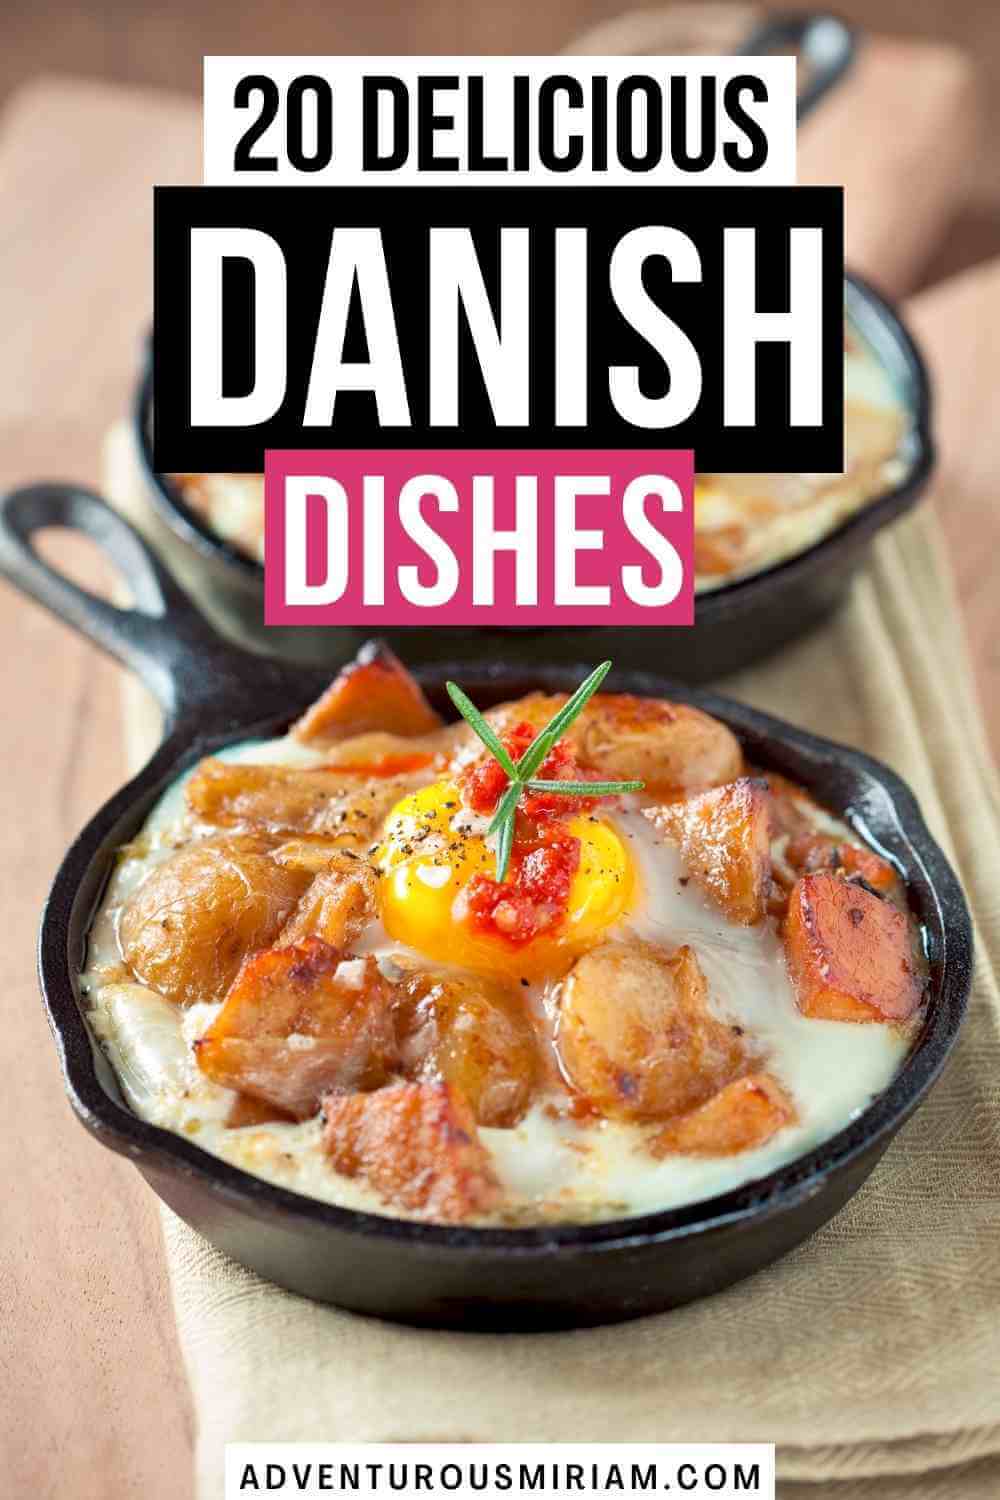 Danish Food Guide I Are you wondering what to eat in Denmark? You've probably heard about Danish pastry and maybe even stegt flæsk med persillesovs, but there's so much more delicious Danish food to try! Here are 20 traditional Danish dishes to eat in Denmark. You'll find most of these dishes in big cities like Copenhagen and Aarhus, but some are regional dishes. Also learn tips to find authentic Danish food on your visit to Denmark. This is the perfect Denmark food guide for traveling foodies. #newnordic #scandinavia #foodguide #denmark #food